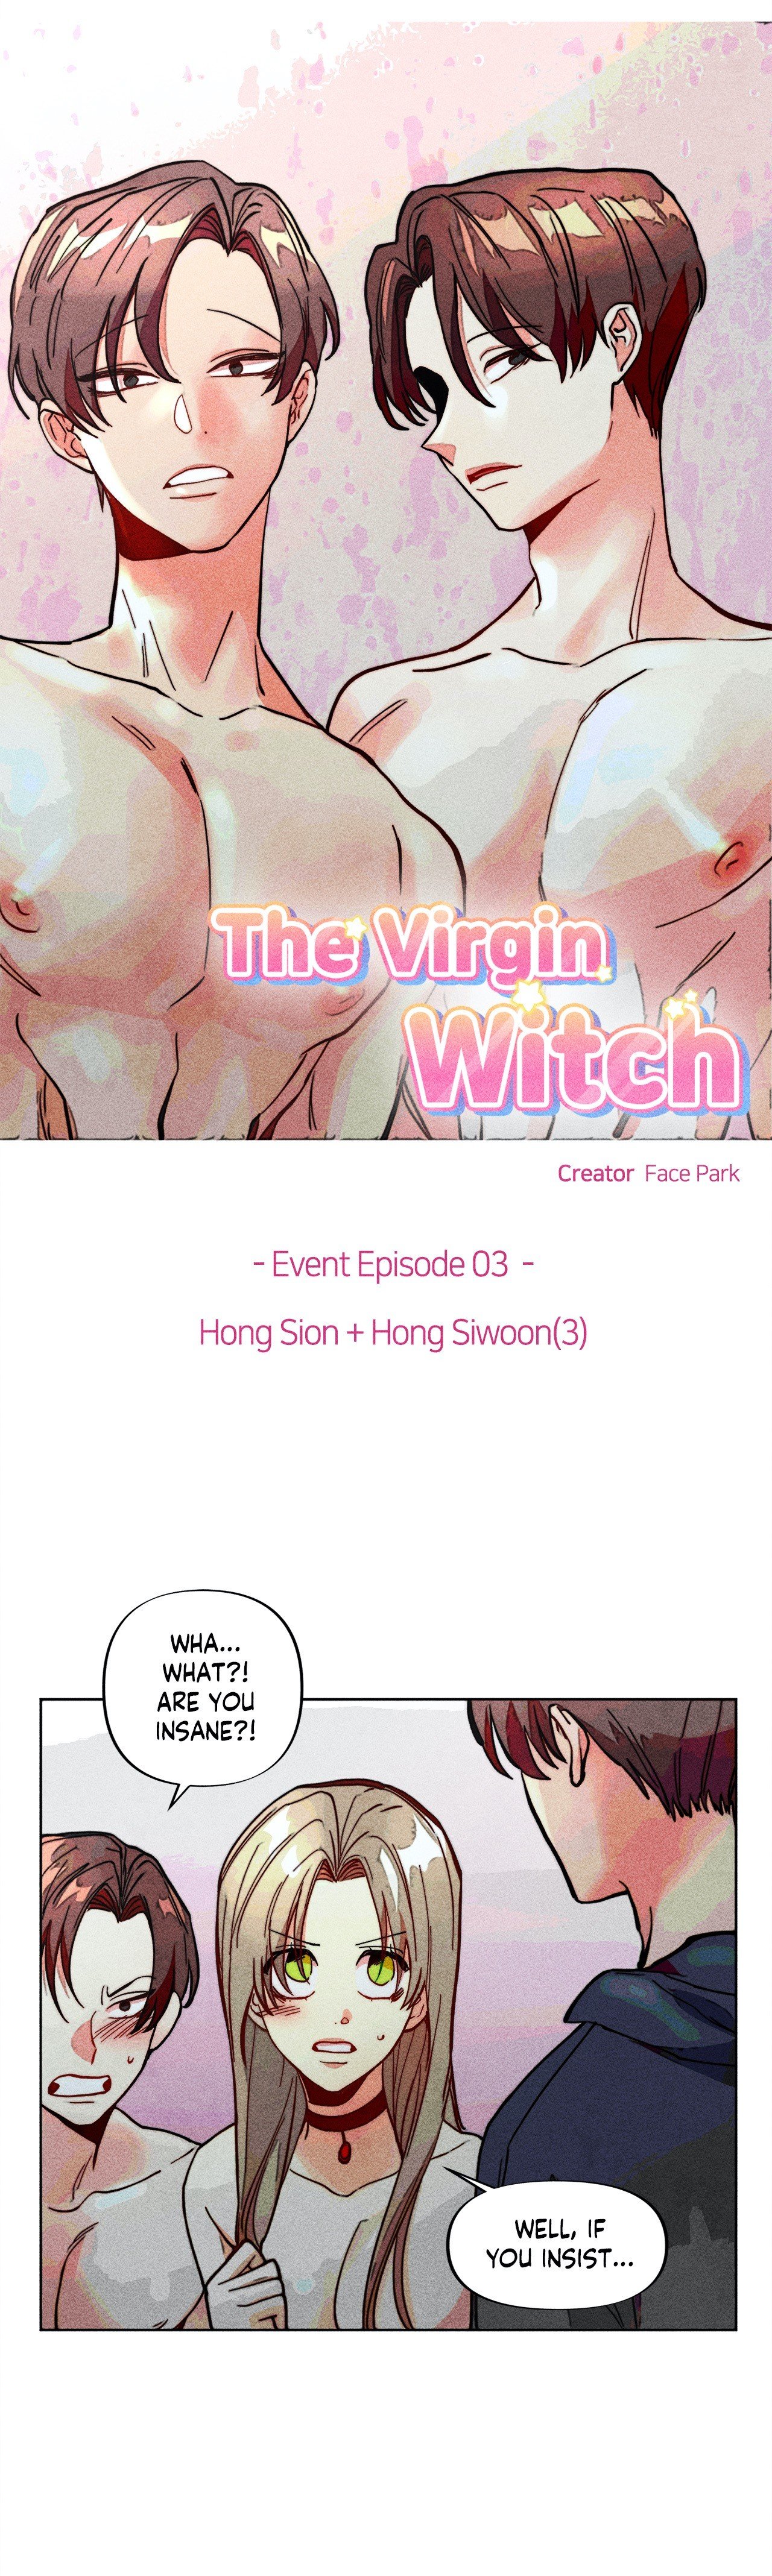 the-virgin-witch-chap-77-2